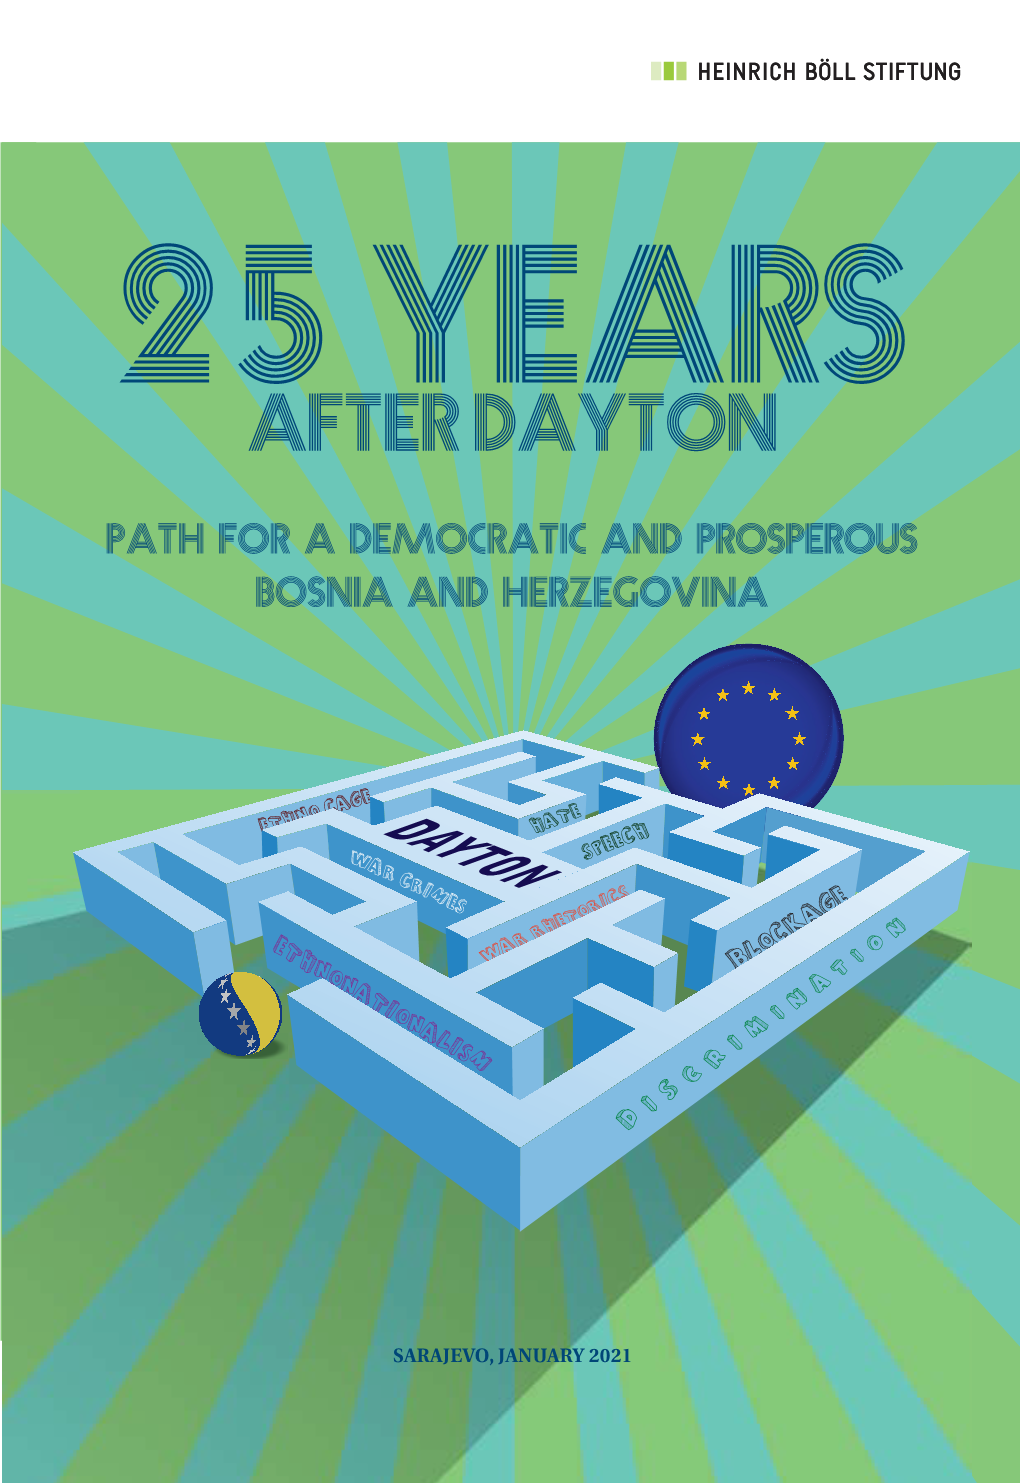 25 Years After Dayton - Path for a Democratic and Prosperous Bosnia and Herzegovina